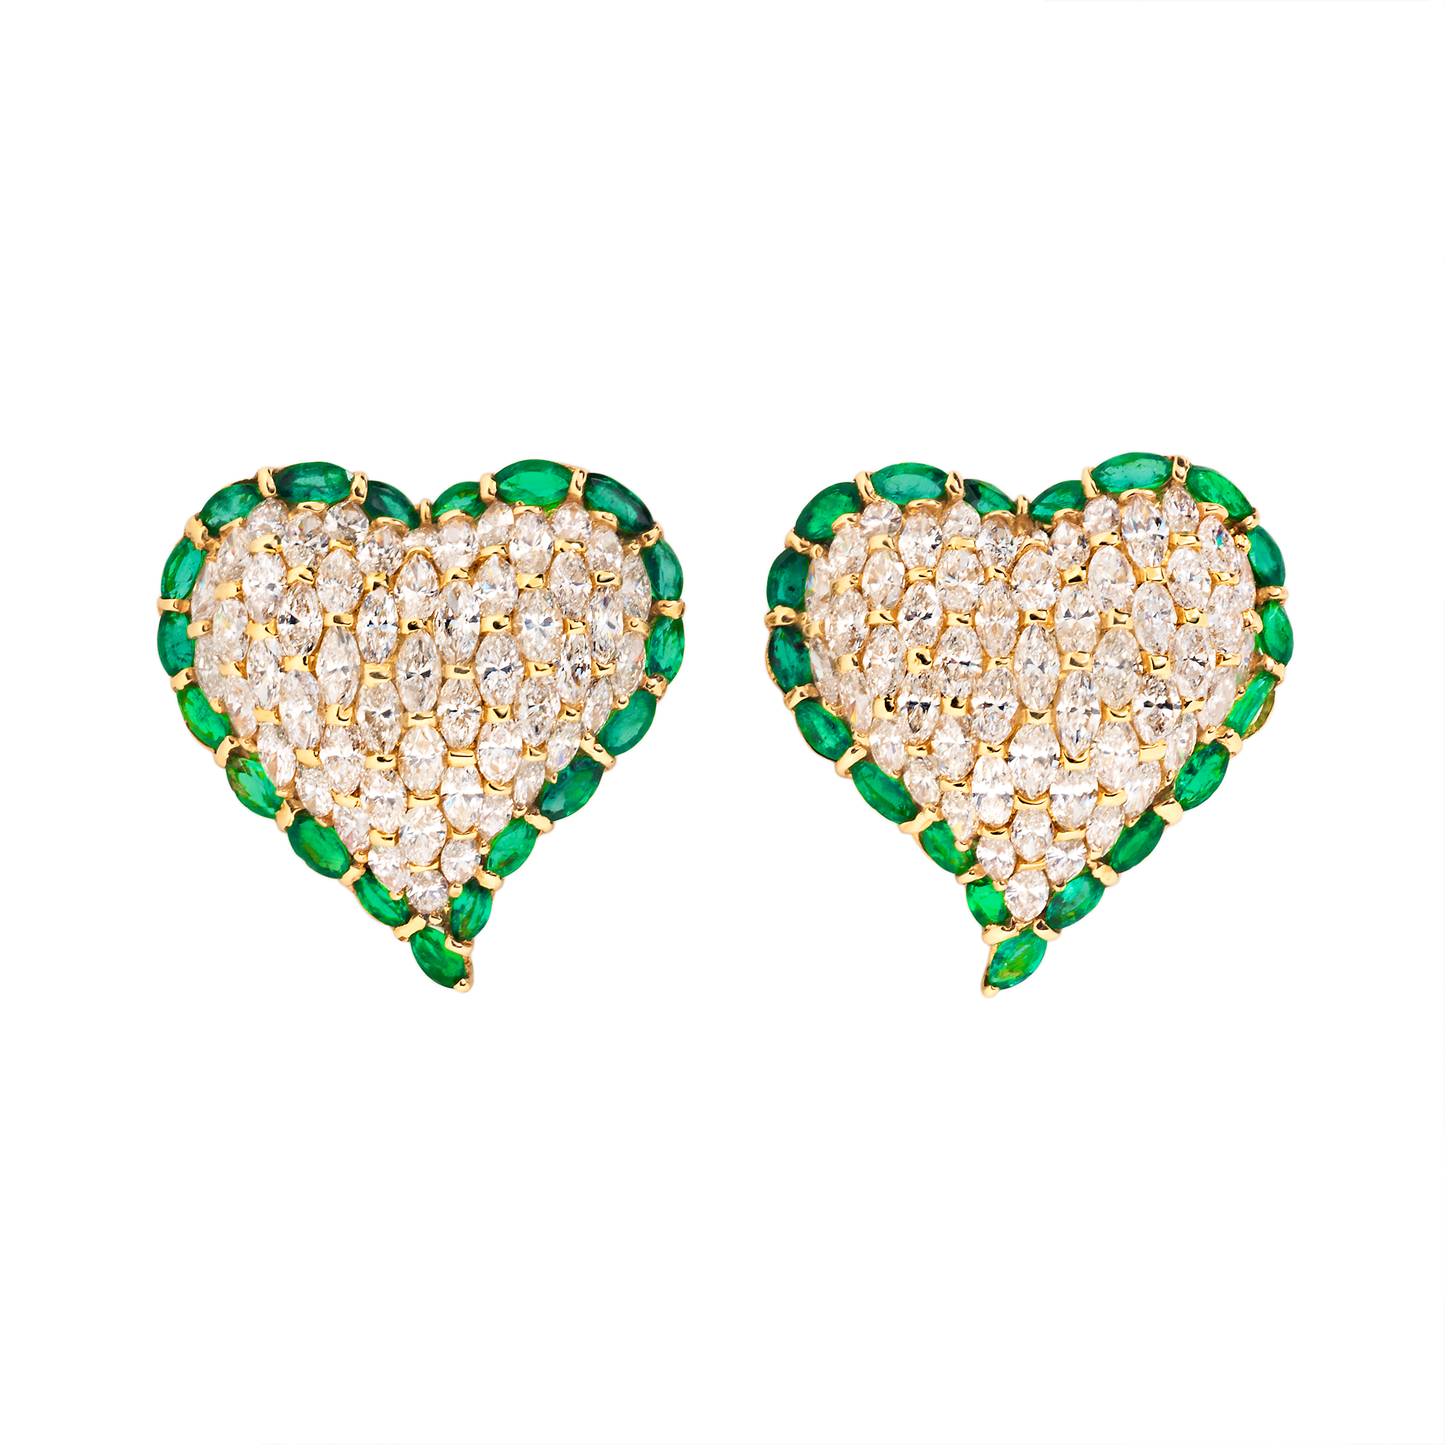 Moussaieff 1980s 18KT Yellow Gold Diamond & Emerald Heart Earrings front view